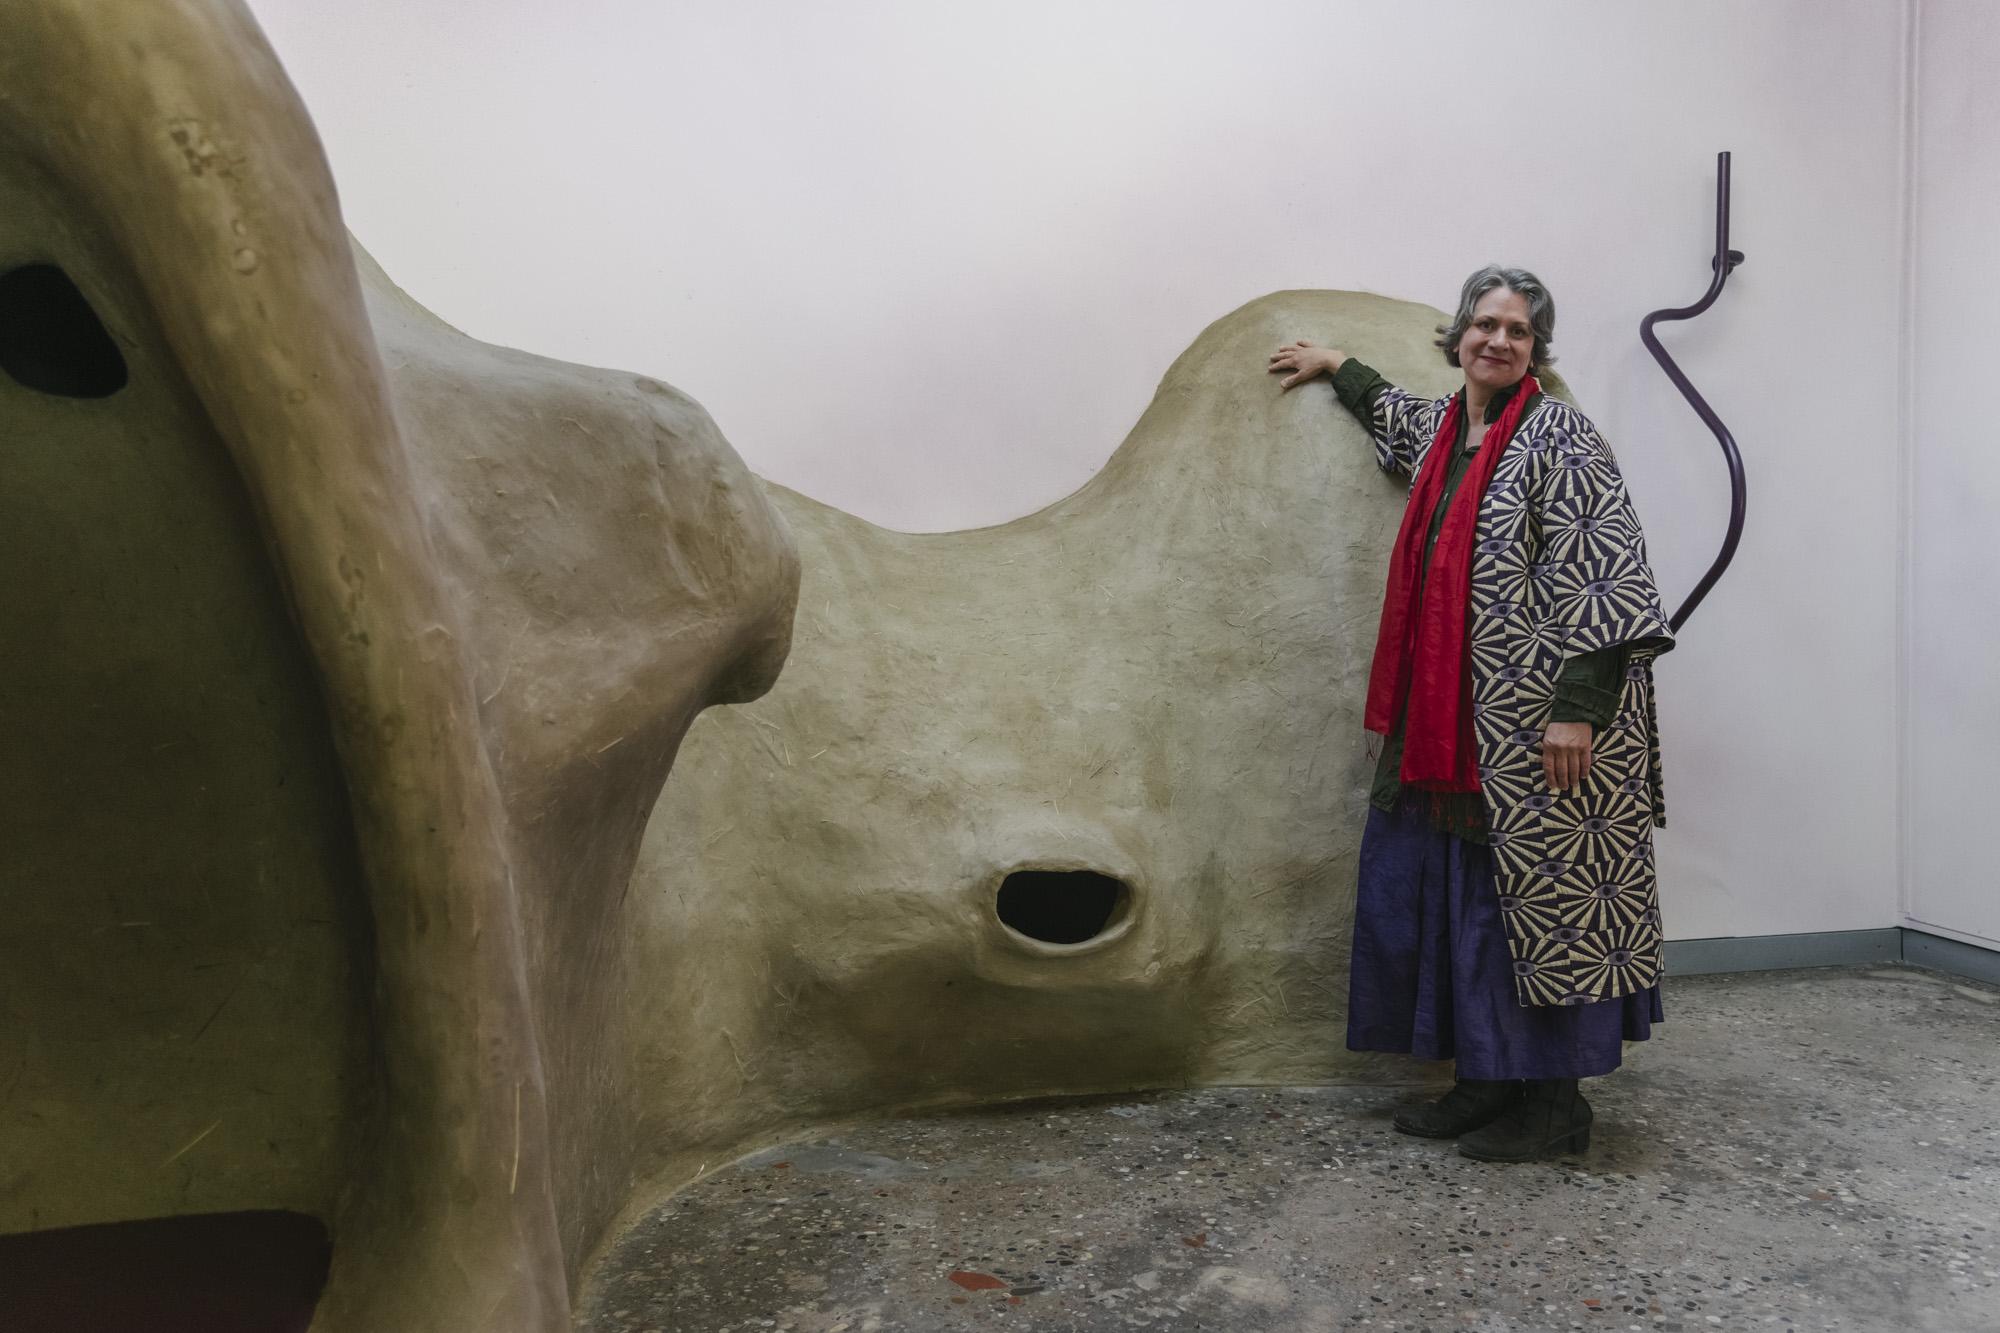 A large beige clay sculpture in an exhibition space, with artist Pia Lindman standing in front of it, wearing a patterned coat and red scarf.